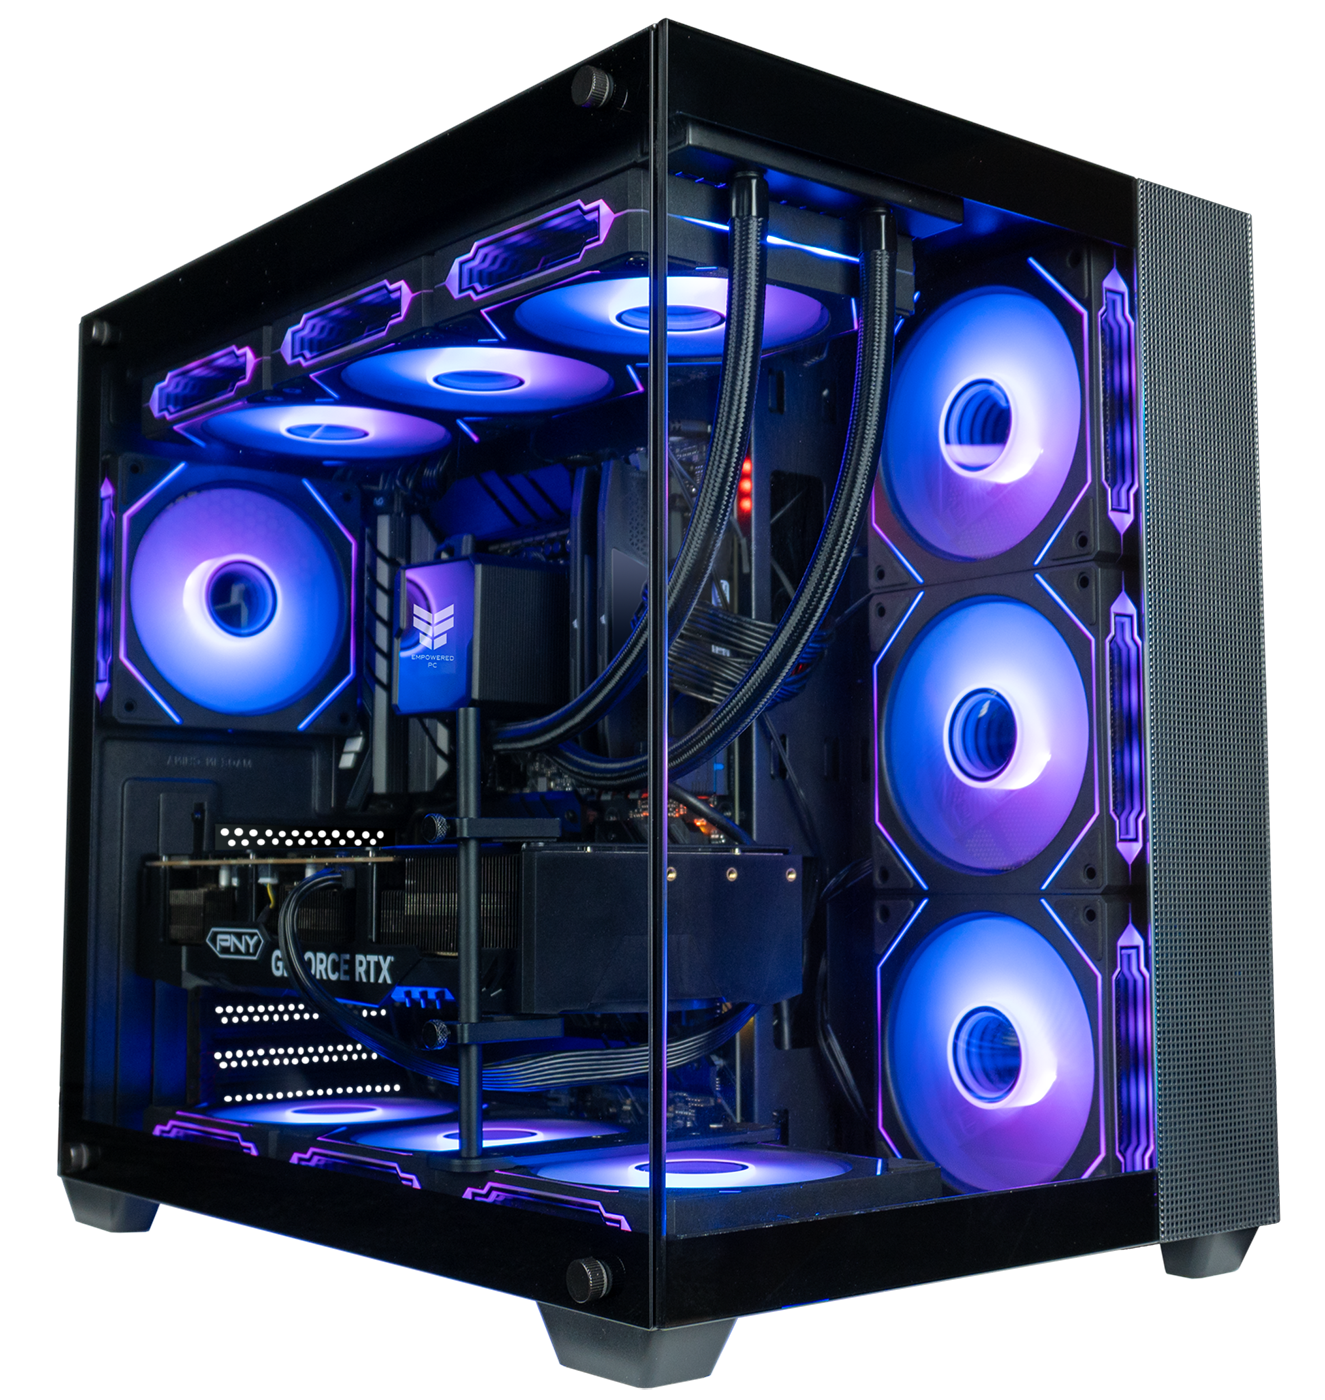 With a 4080 TI GPU powered 240 fps gaming pc, the Panorama competes with Legion PC Tower 5i 5 7i and Acer Predator Orion 3000